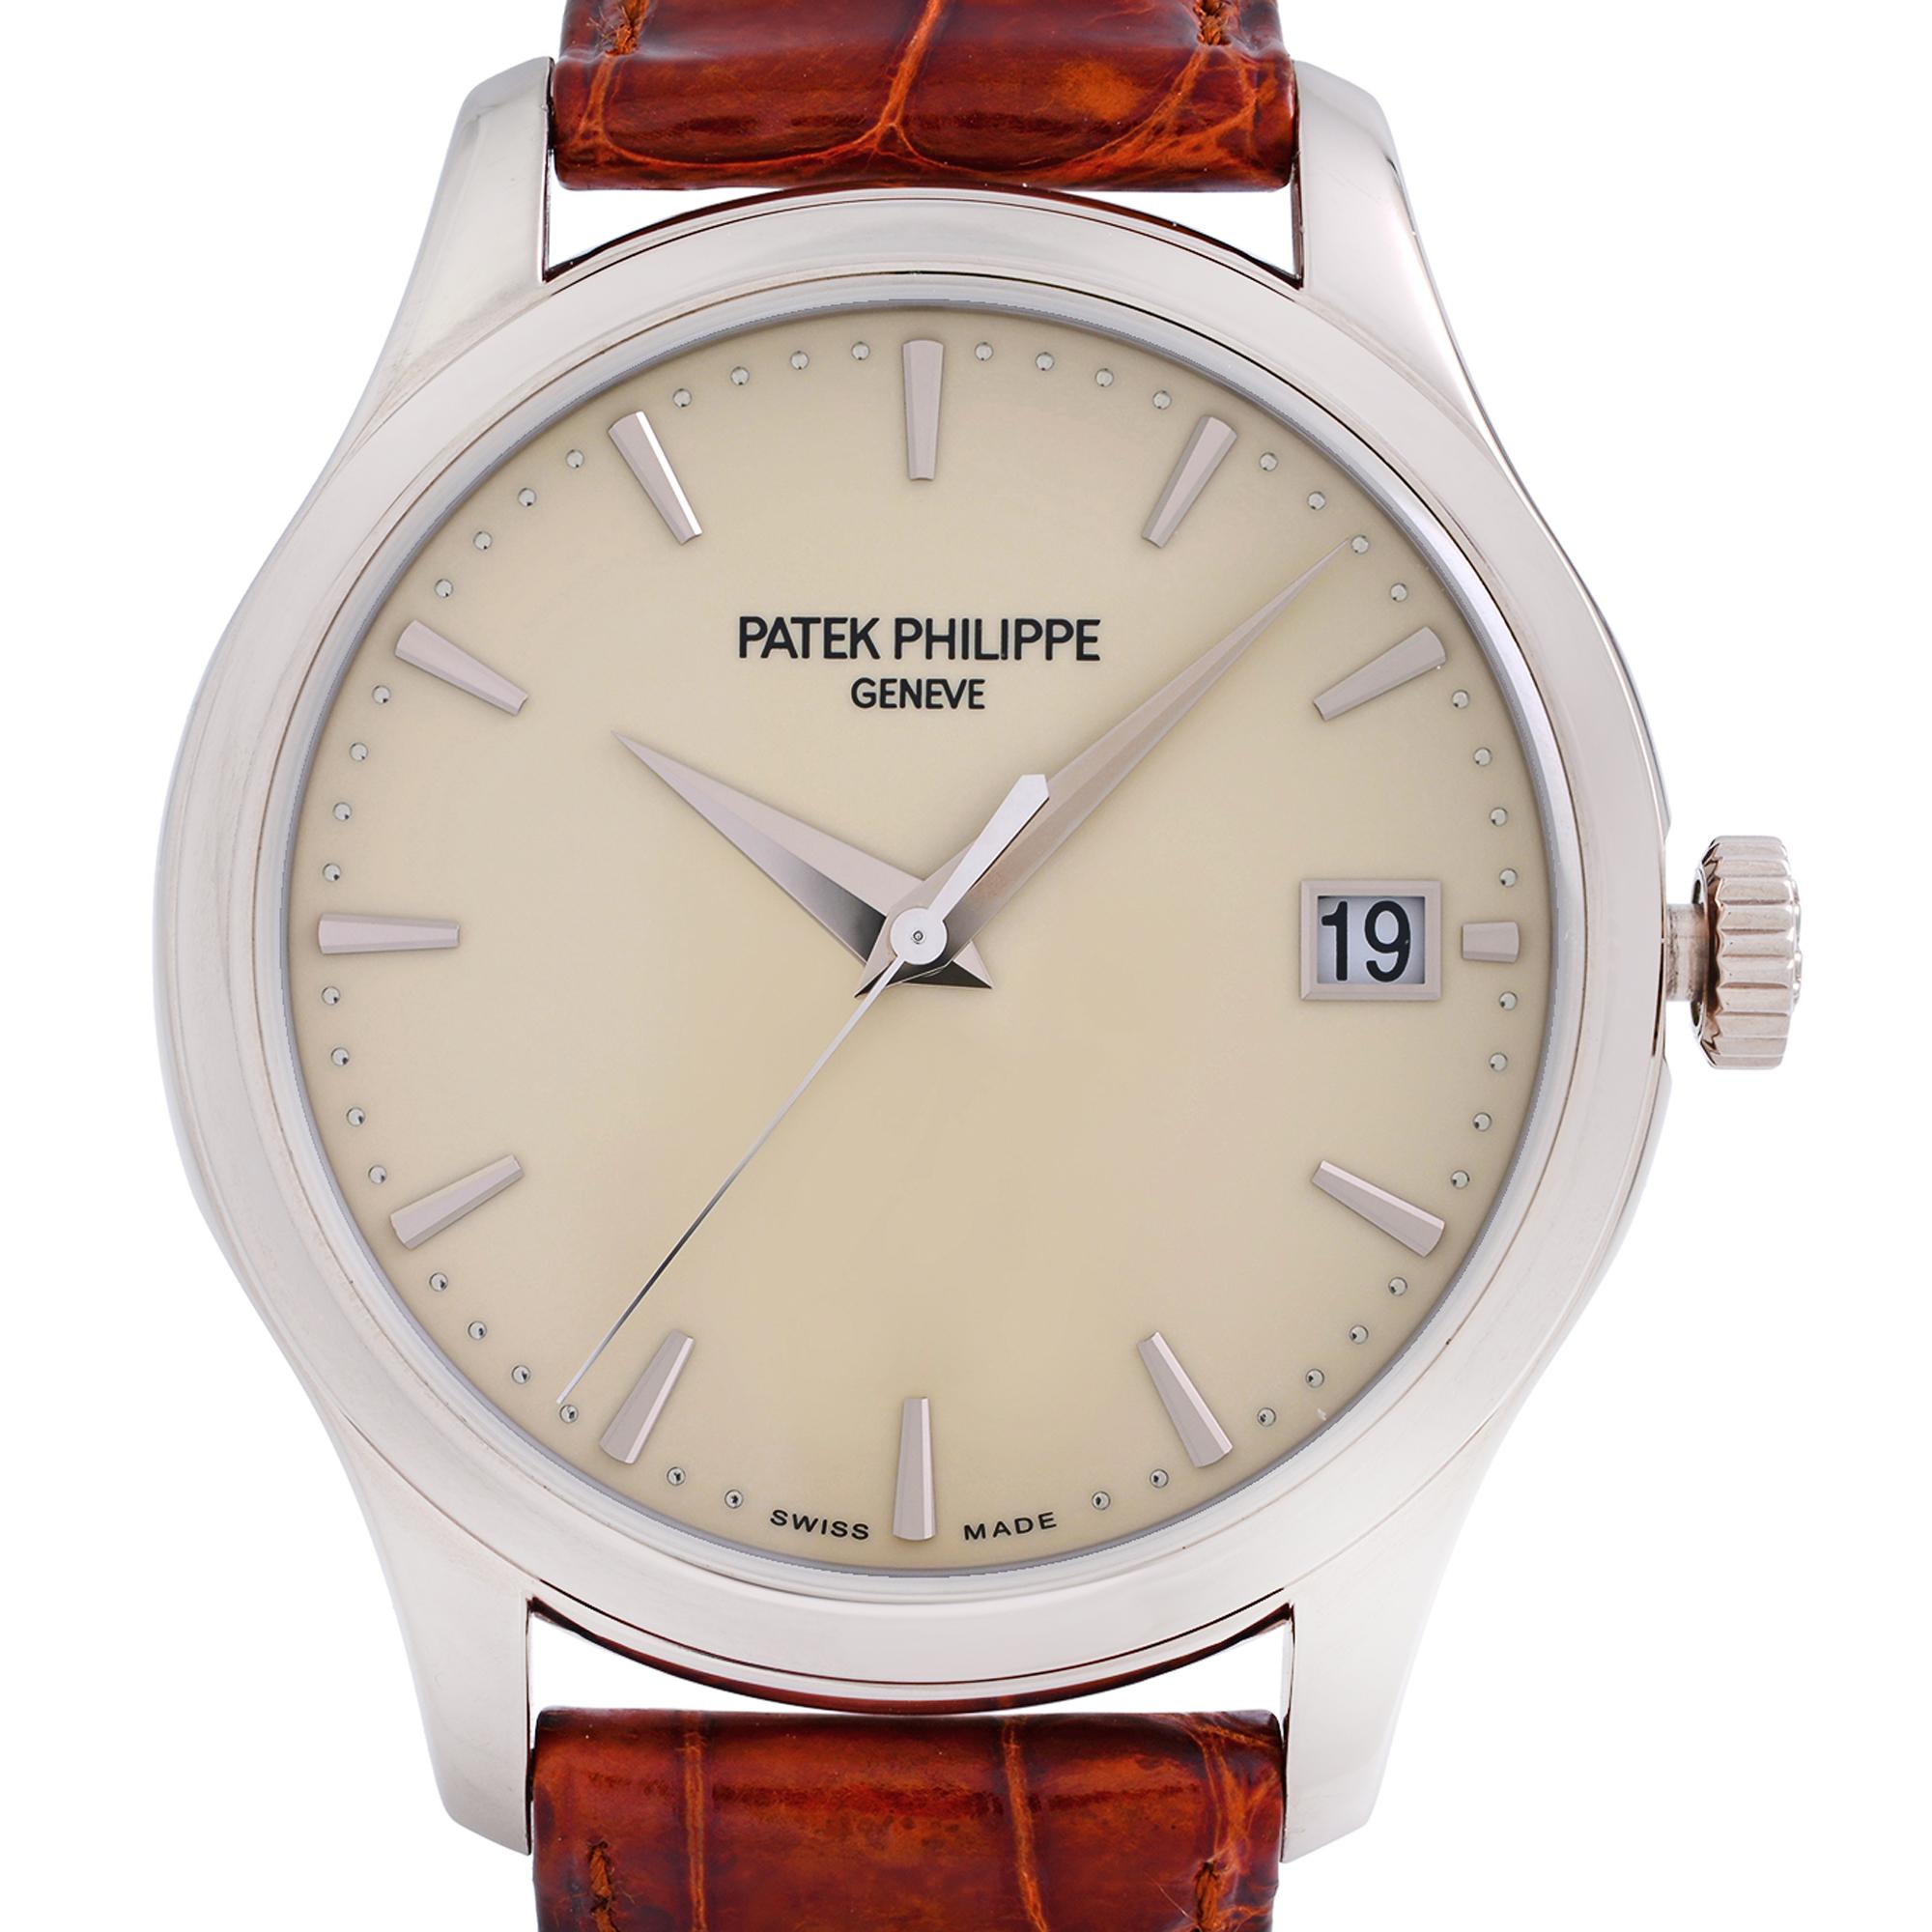 Pre-owned Excellent Condition. Minor Wear Sign-on inner side of the band. Comes with a manufacturer's box and papers. Backed by a 1-year warranty provided by Chronostore.
Details:
MSRP 37850
Brand Patek Philippe
Color Gold
Department  Men
Model